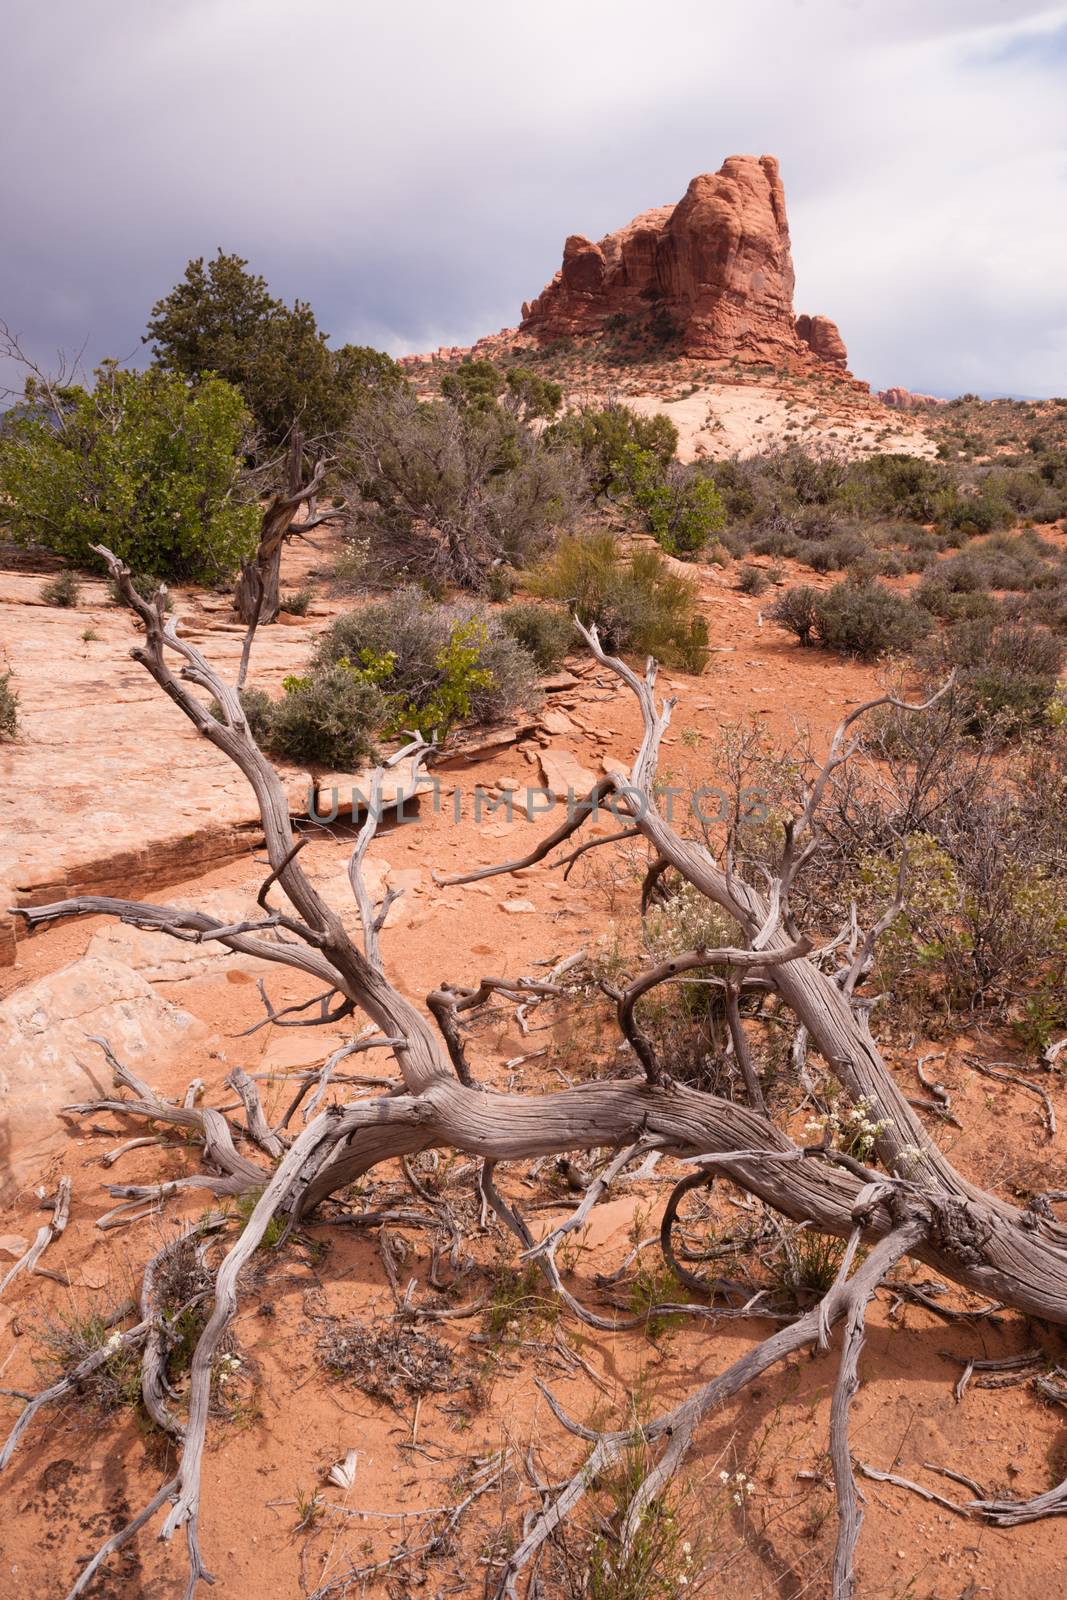 Rain Clouds Gather Over Rock Formations Utah Juniper Trees by ChrisBoswell